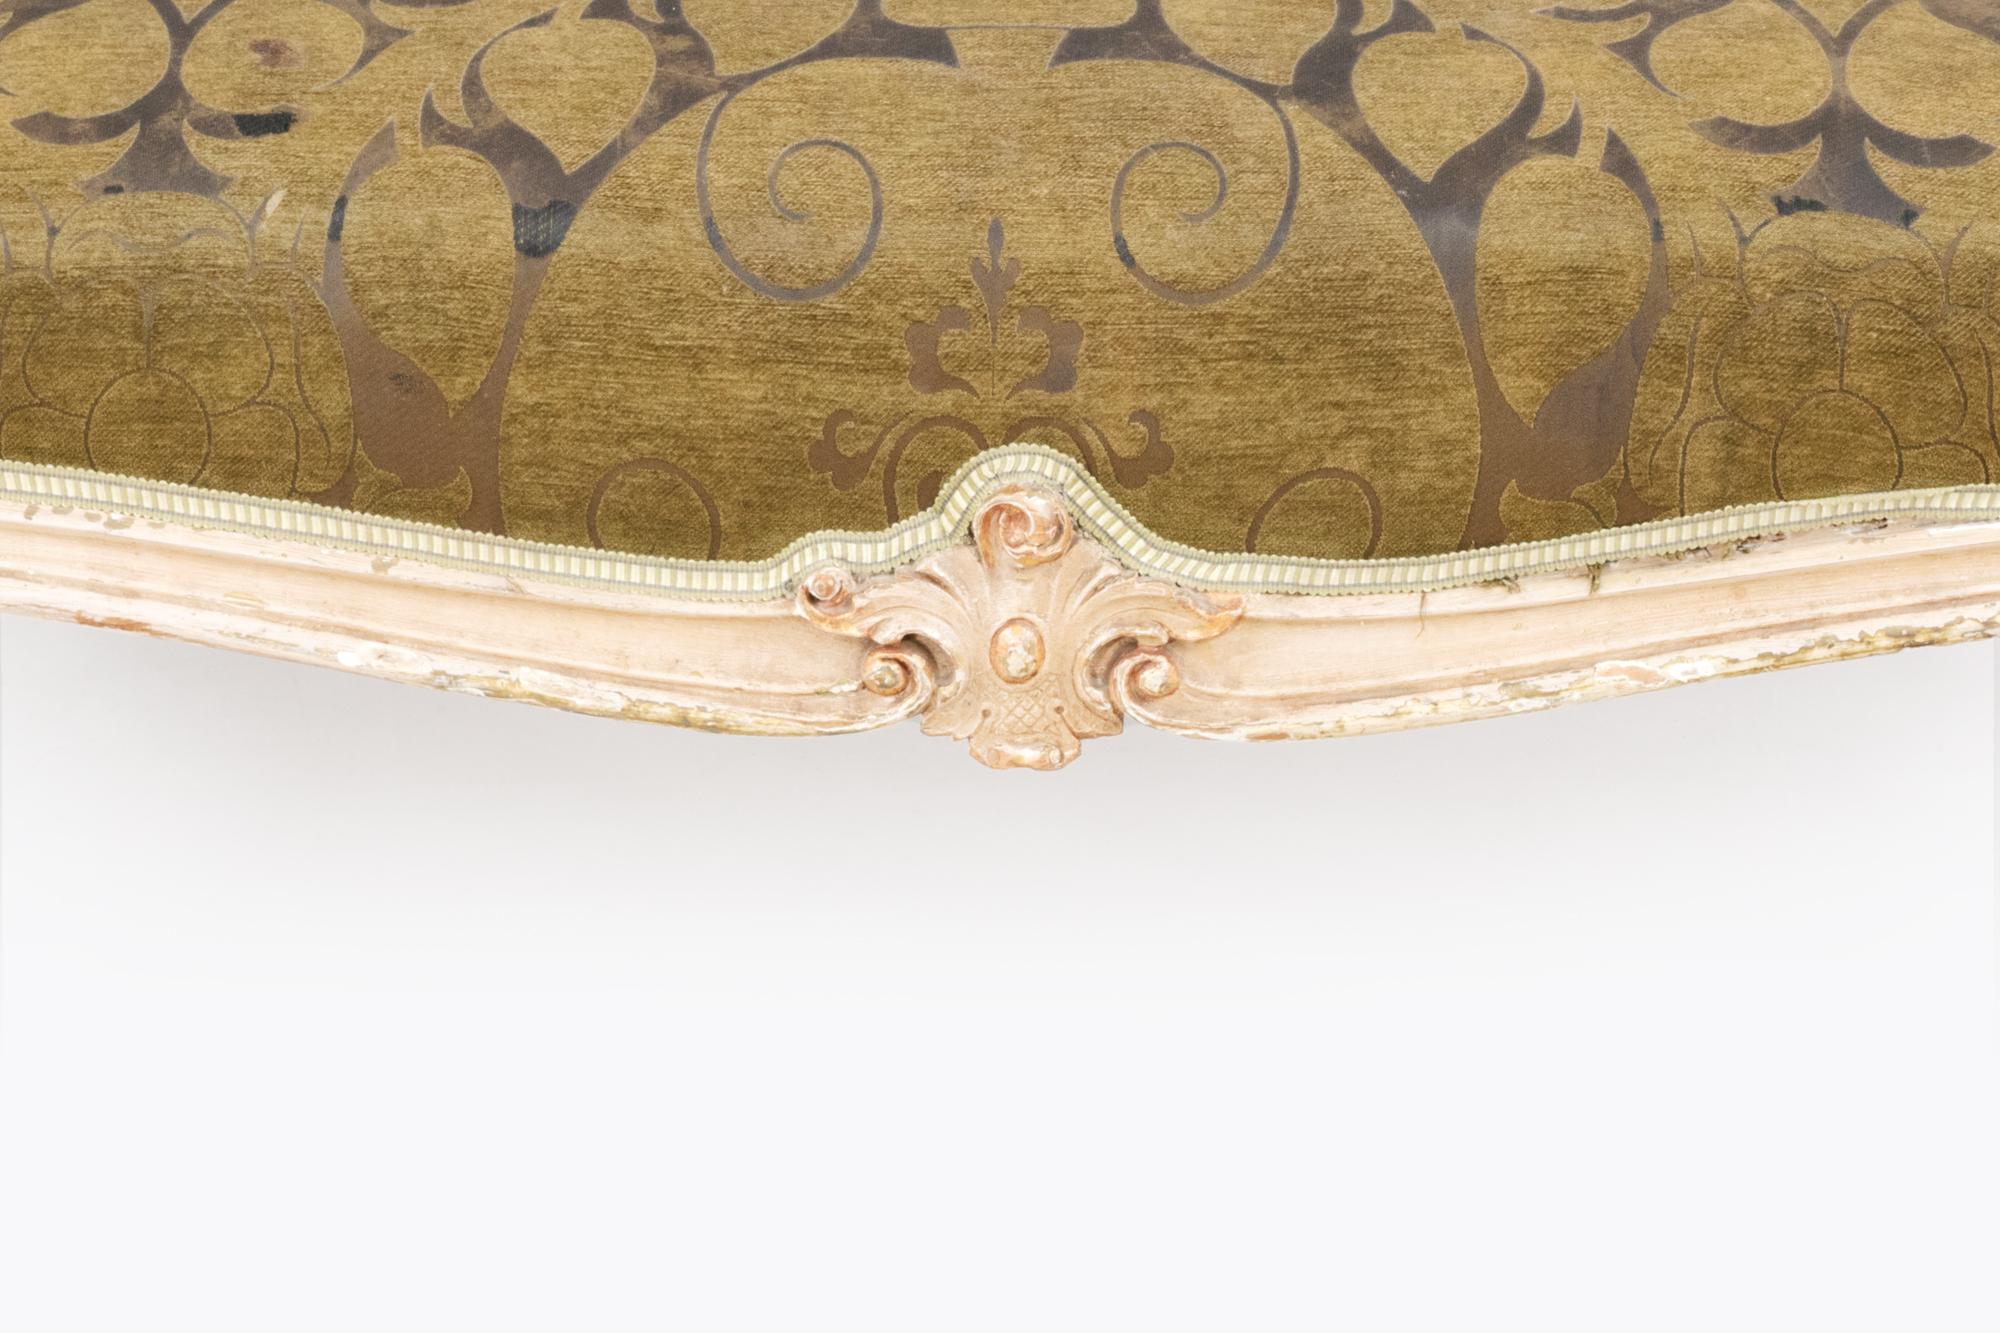 Late 18th century giltwood central ottoman. The upholstered cushion top sits above a gilt frame elegantly carved with central cartouches and cabriole legs terminating in scrolled feet.